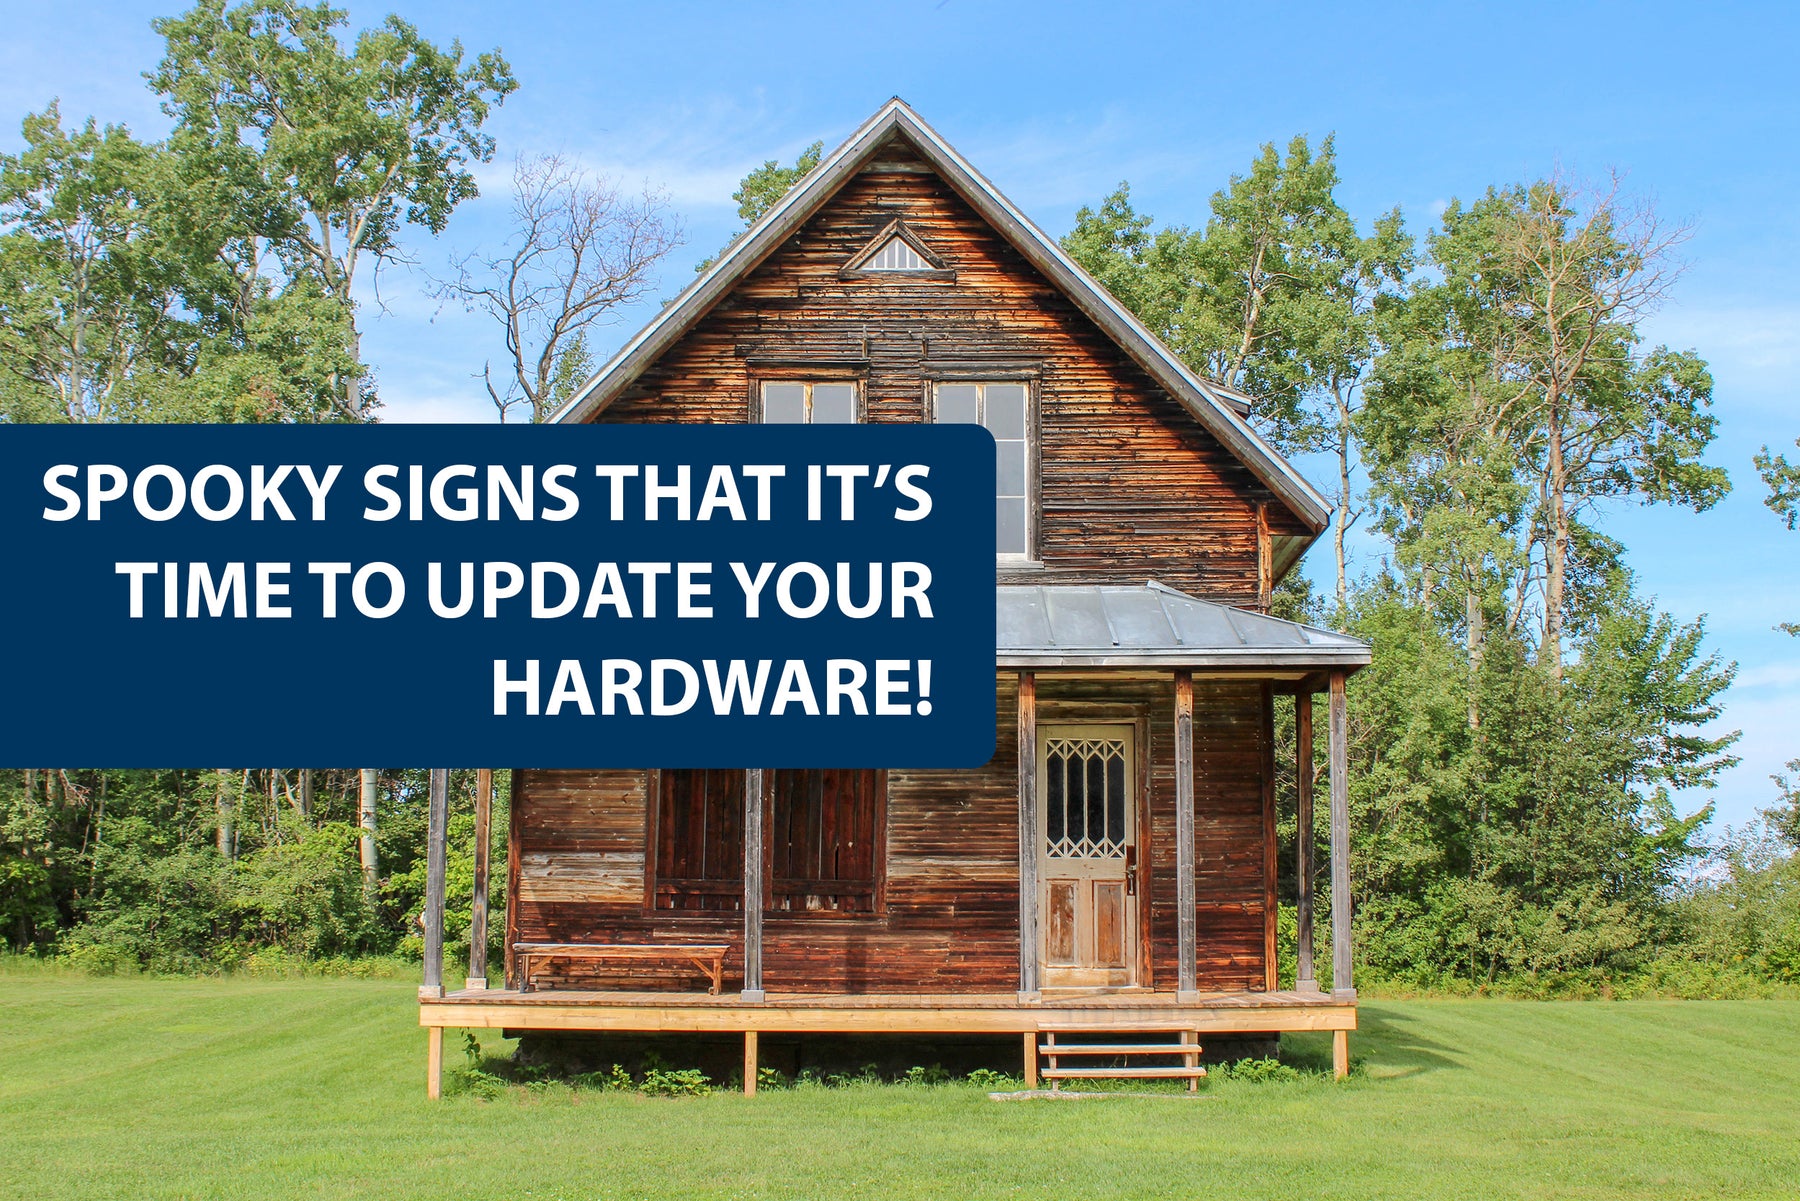 Spooky Signs That It’s Time to Update Your Home’s Hardware